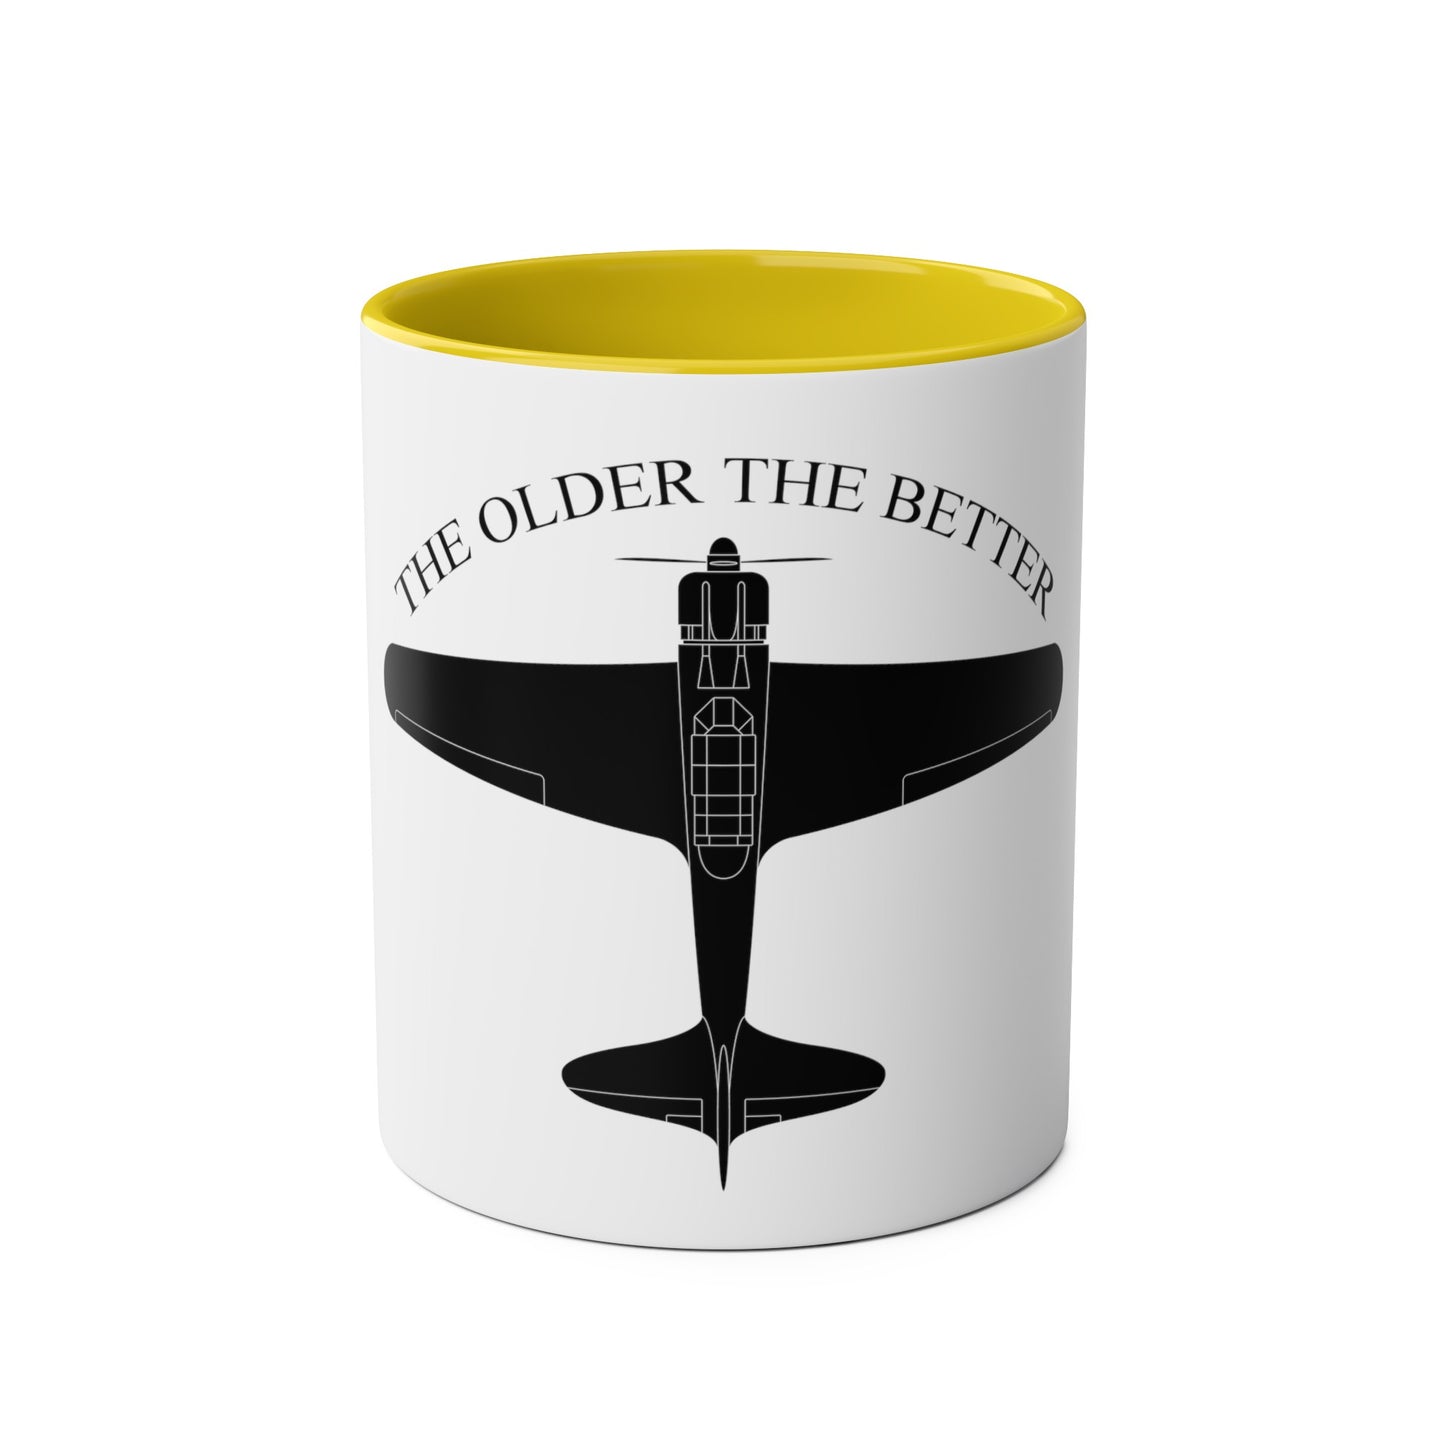 The Older the Better Two-Tone Coffee Mugs, 11oz